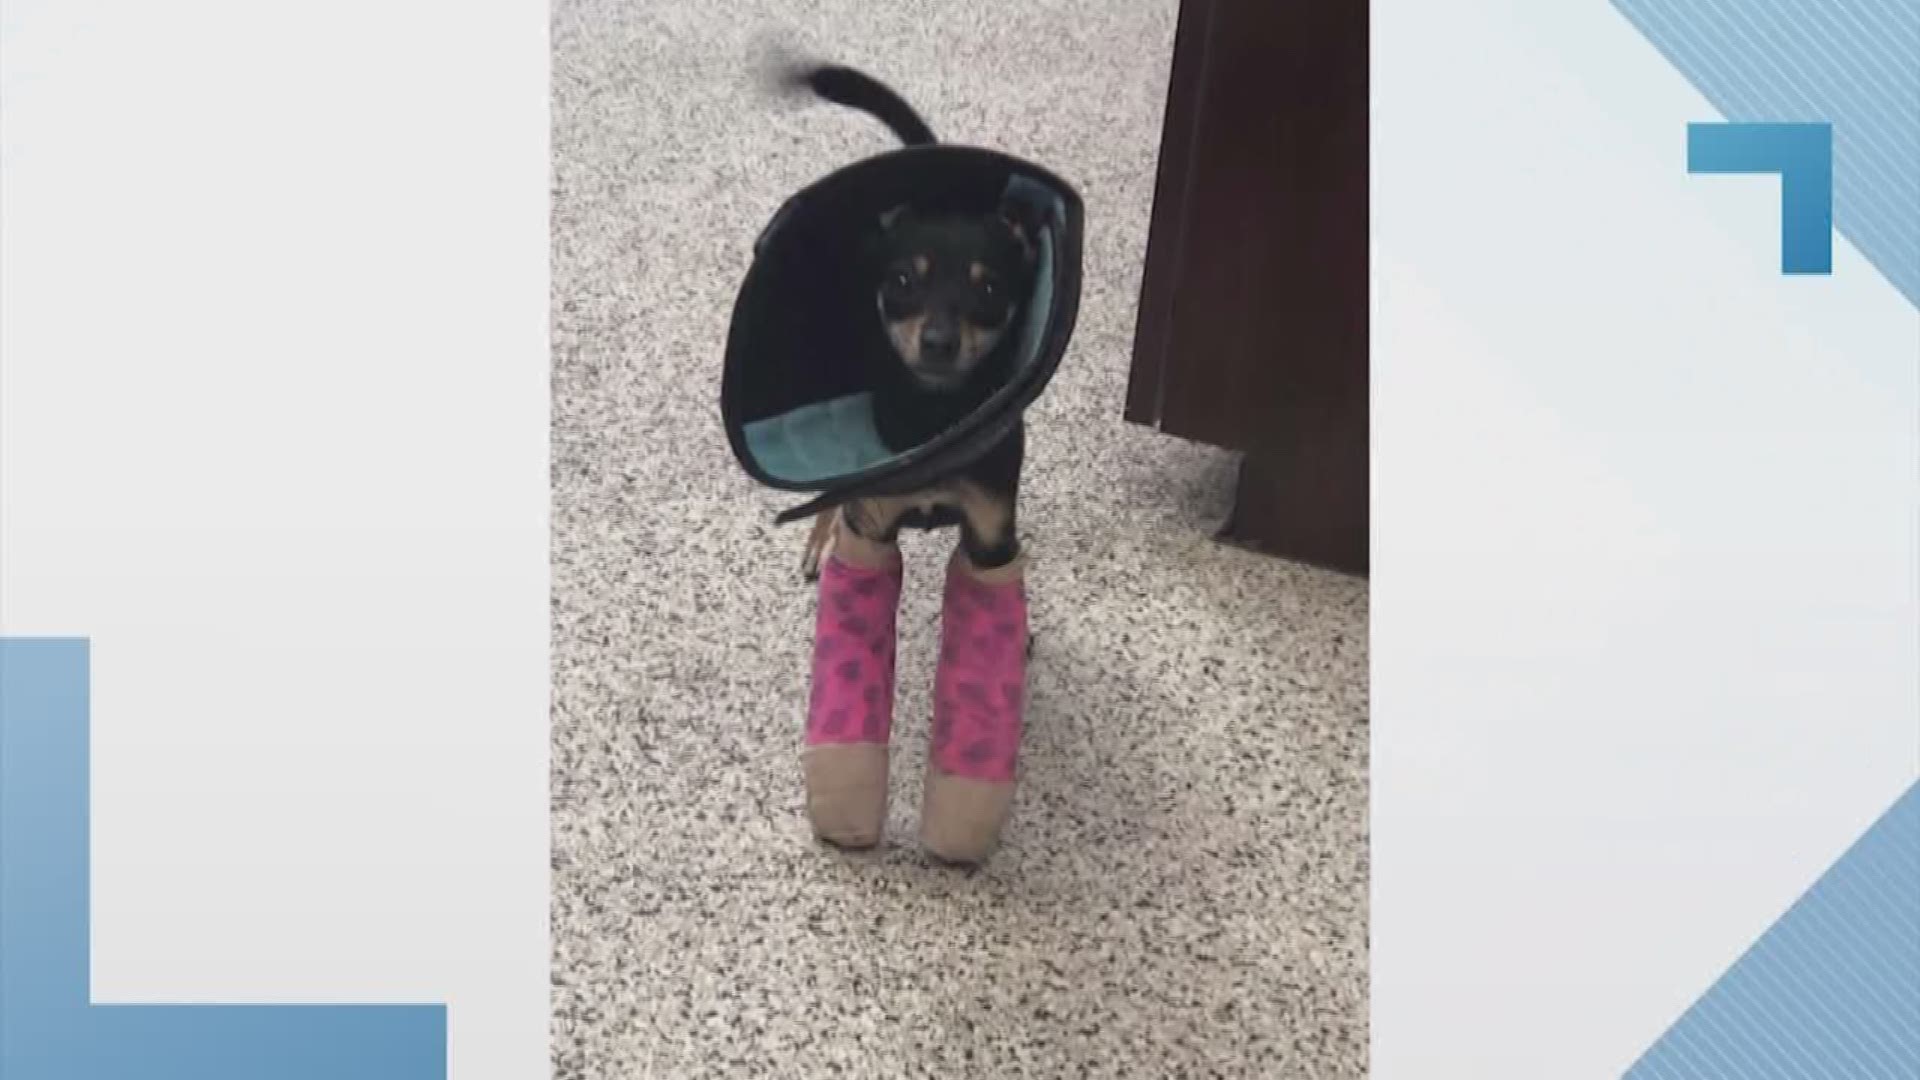 The Brazoria County SPCA says an injured puppy was brought to them after its owner could no longer care for him.